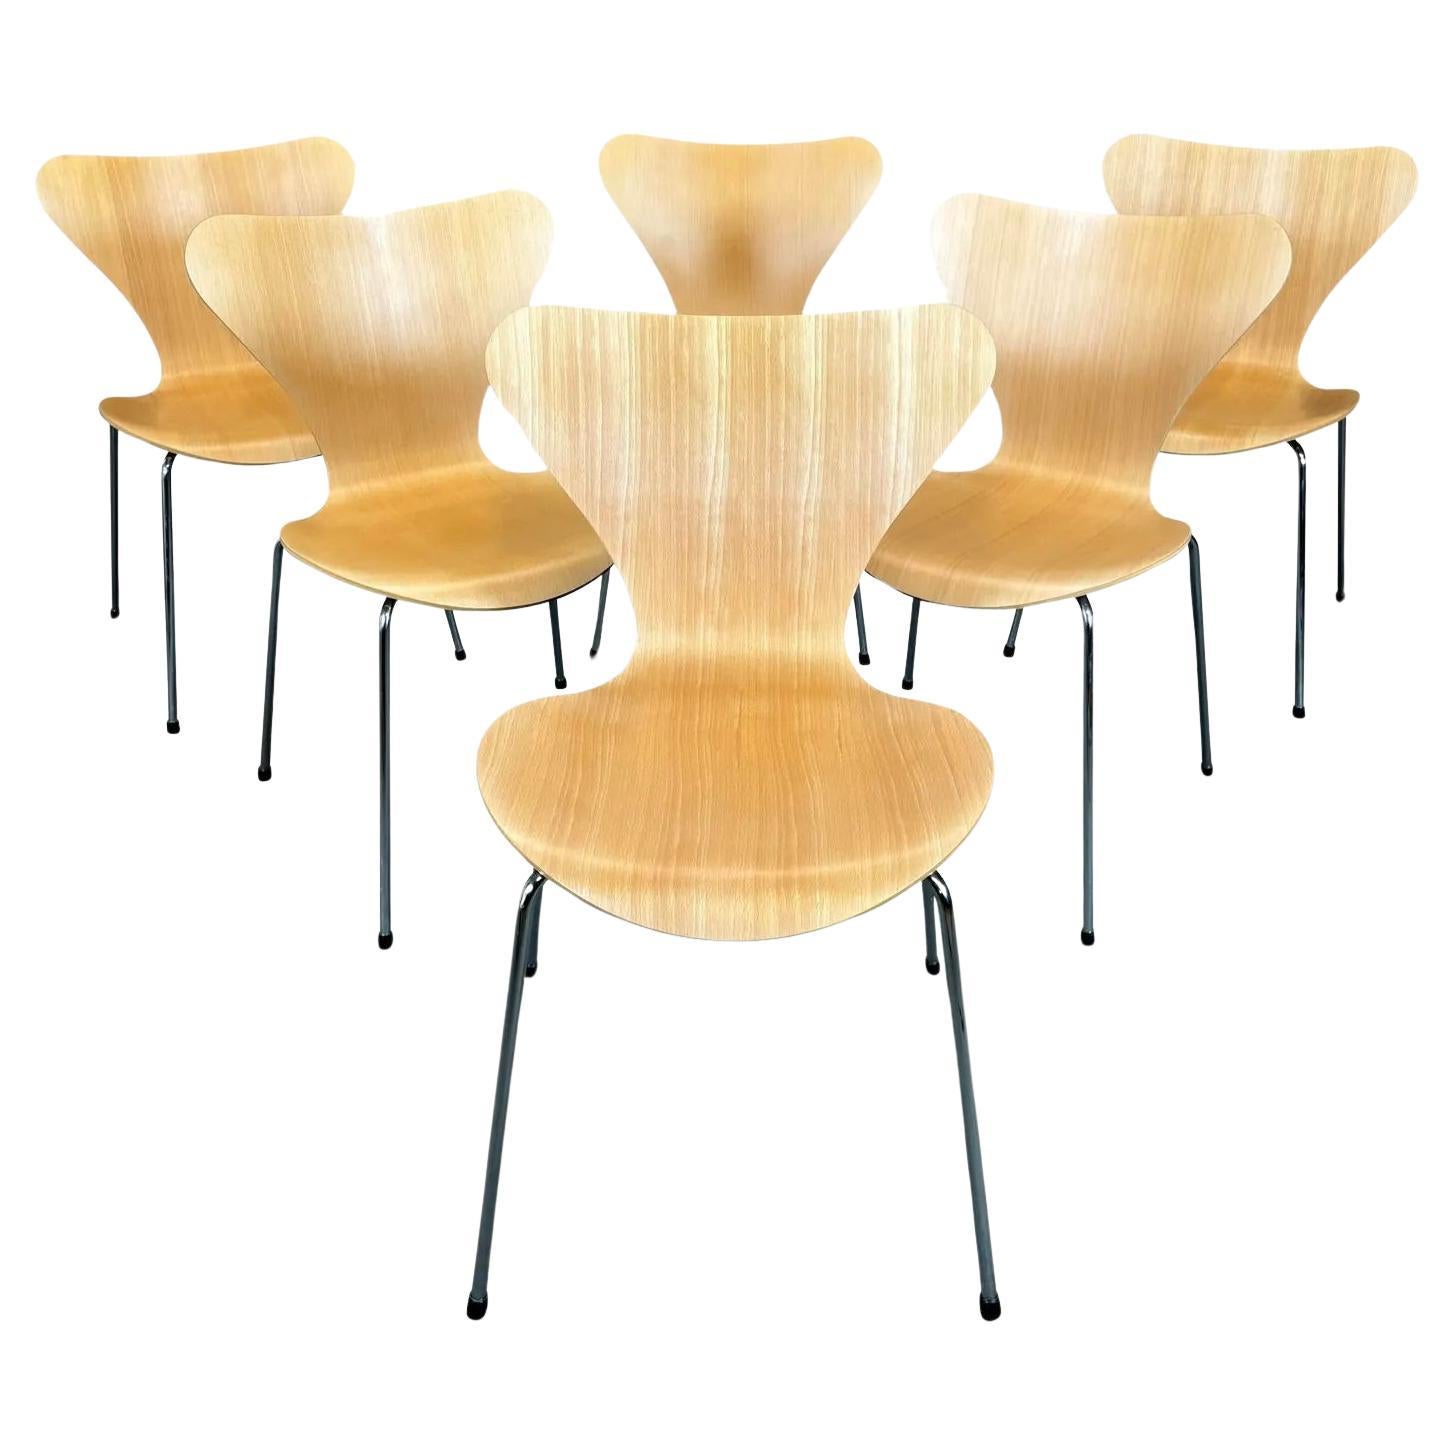 Six Vintage Danish Mid Century "Serie 7" Dining Chairs by Arne Jacobsen For Sale